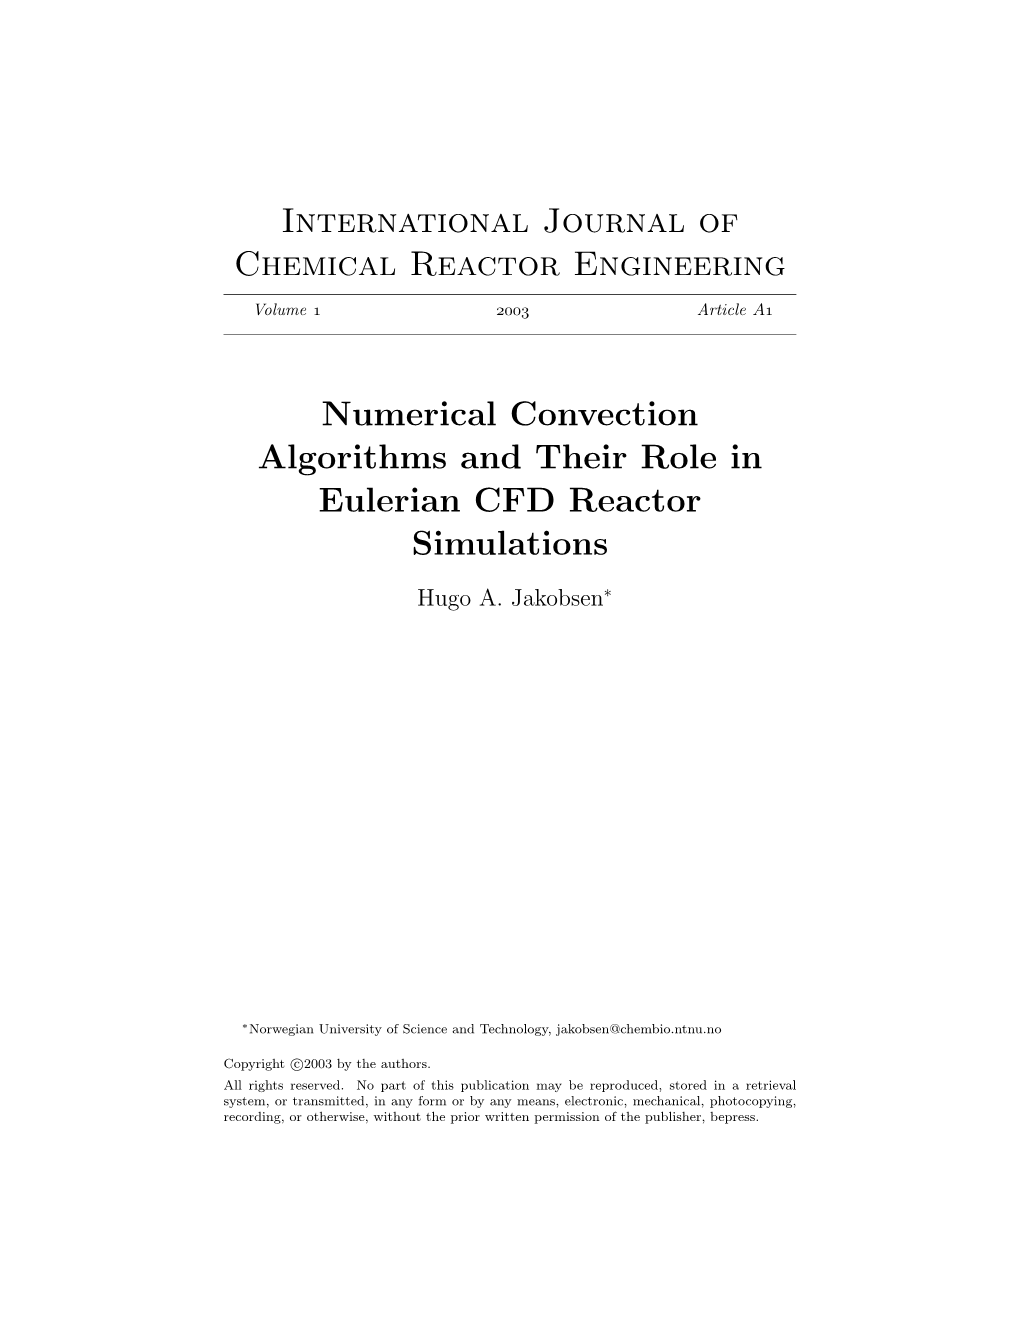 Numerical Convection Algorithms and Their Role in Eulerian CFD Reactor Simulations